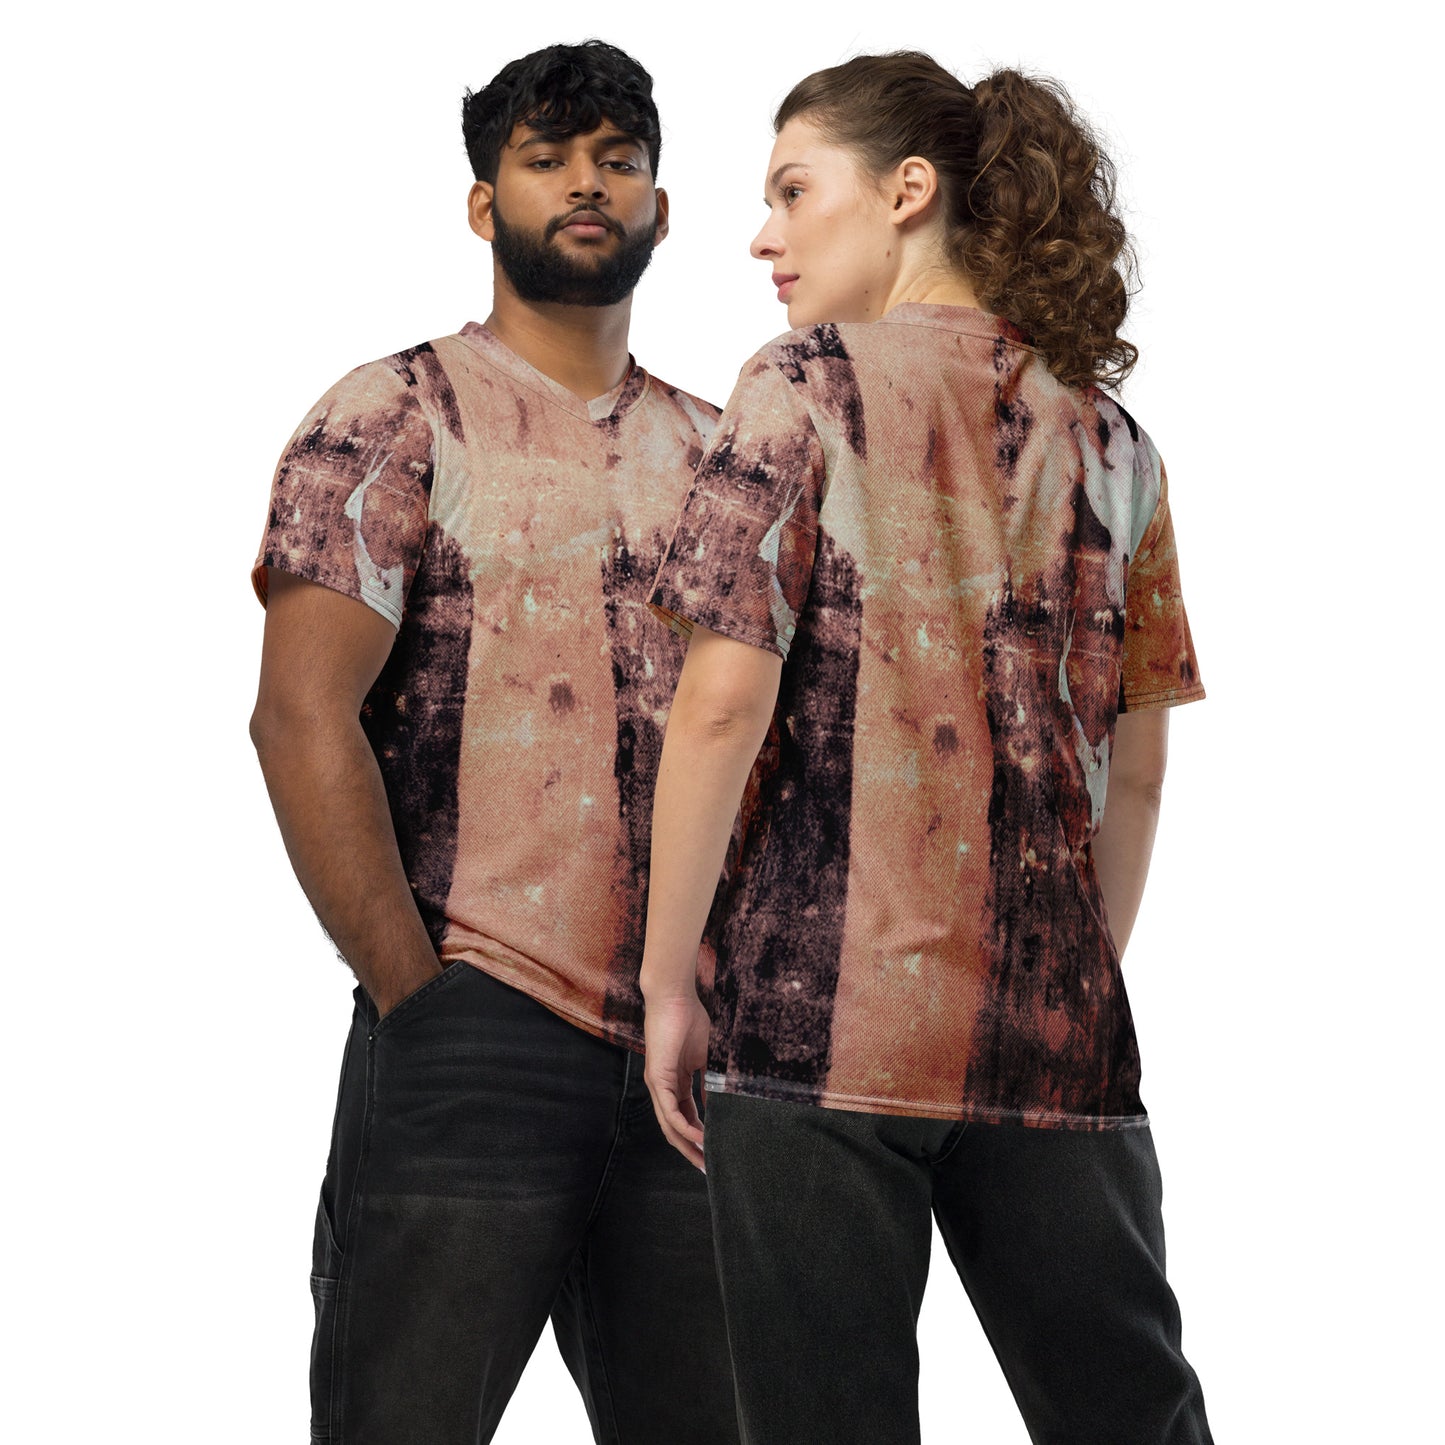 Abstract X Series, T-shirt, Tee - New York City | Recycled Unisex Sports Jersey